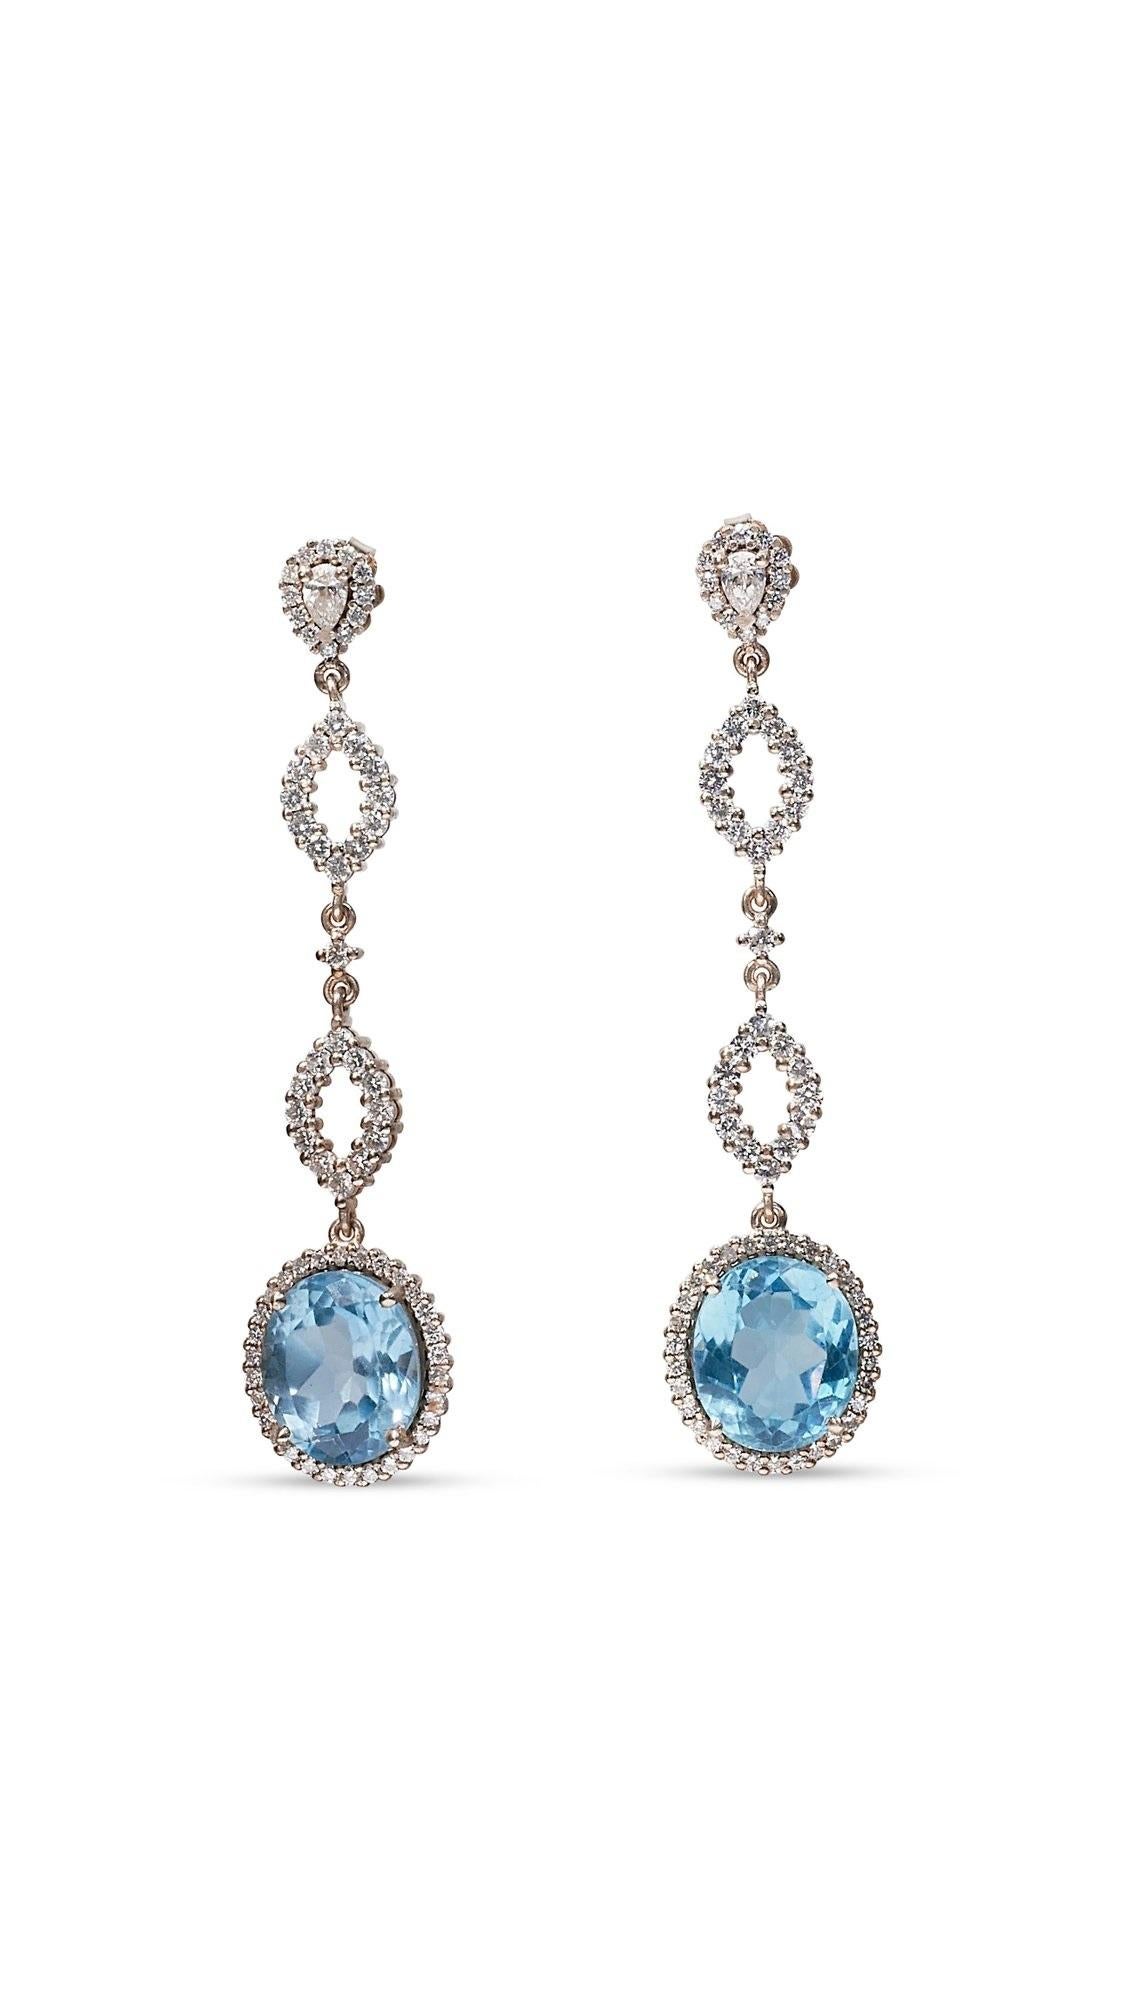 18k White Gold Drop Earrings with 17.37 ct Natural Topaz and Diamonds IGI Cert For Sale 1